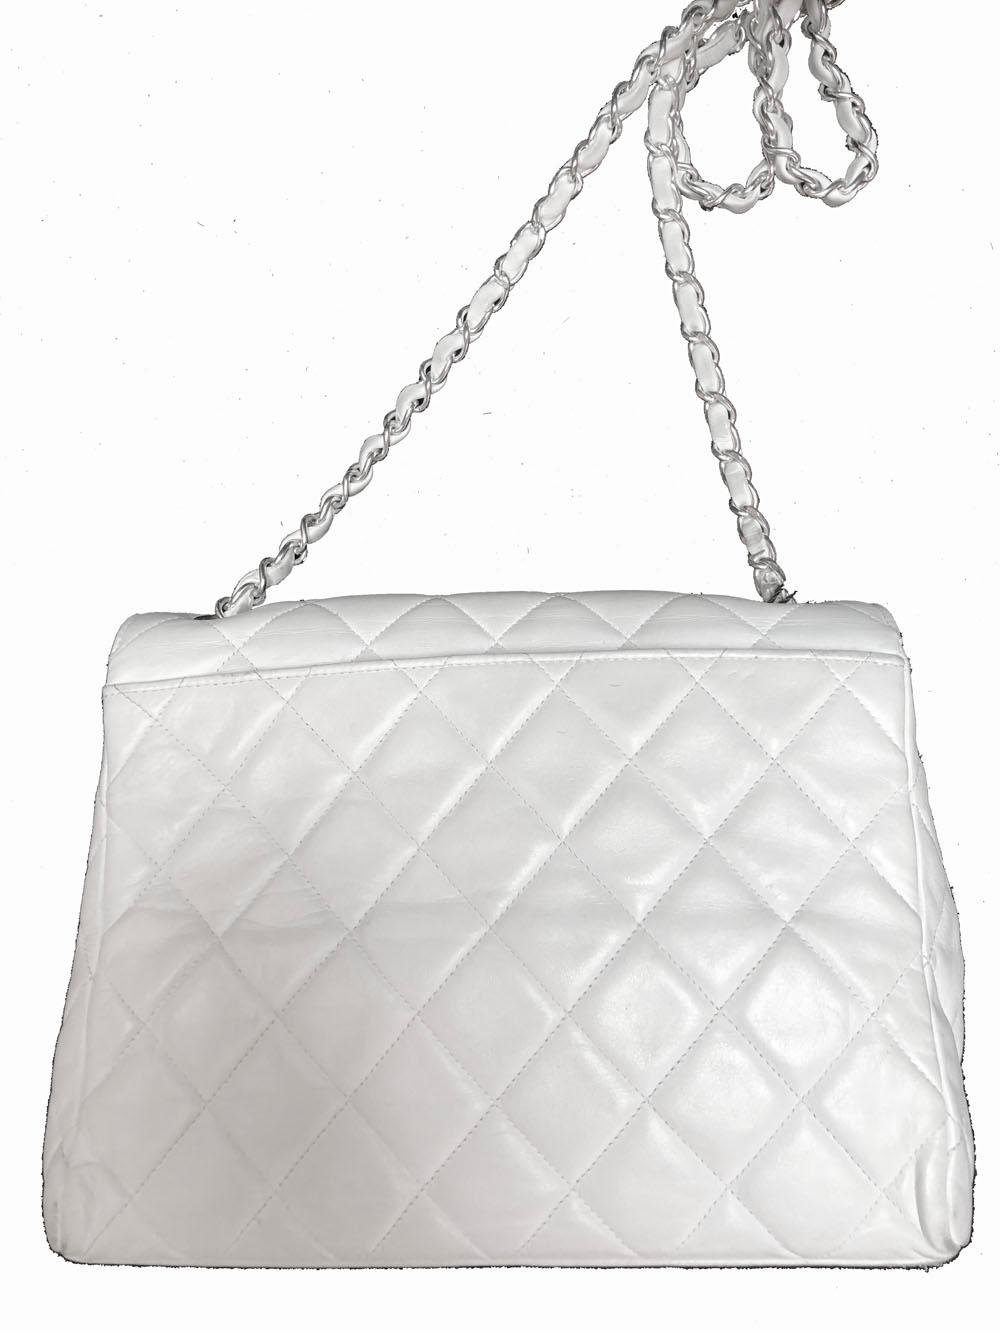 Chanel flap bag from the late 90s. Quilted white leather with silver hardware. Chain strap. Turnlock closure. CC logo embroidered on inside flap. One internal slide pocket, one internal zip pocket. One slide pocket on back. Some discoloration on